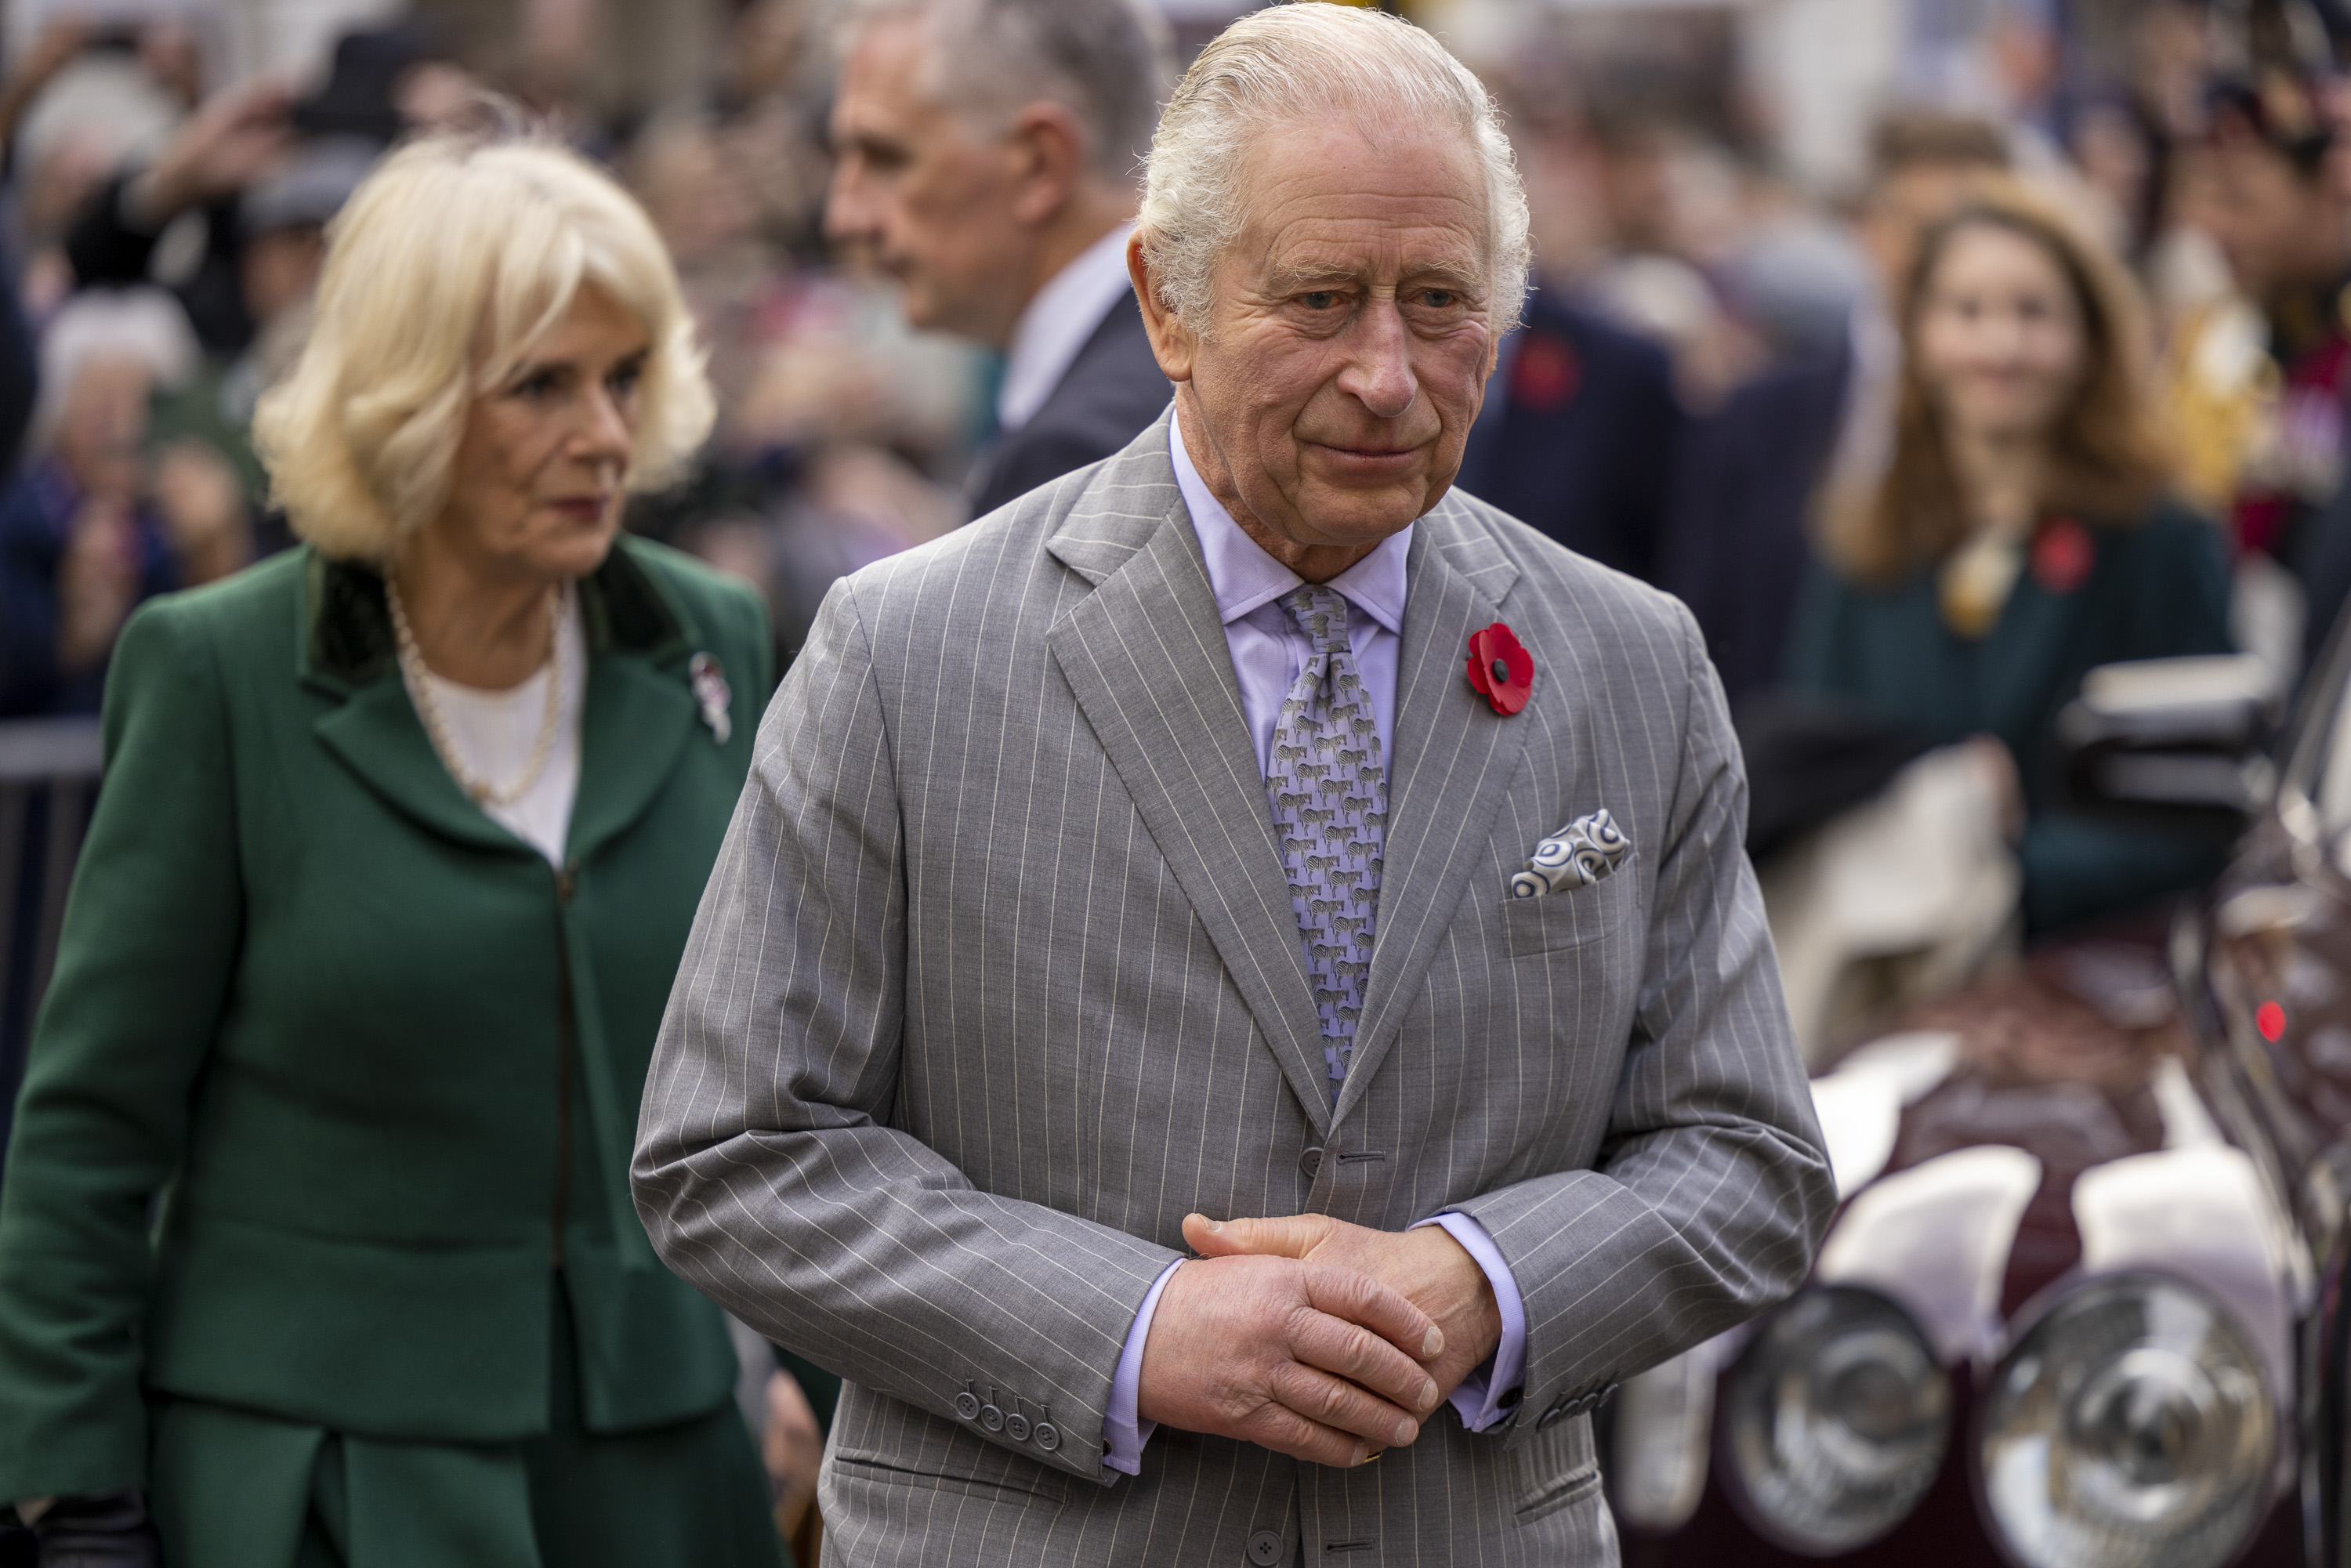 File photo of King Charles III and Queen Consort Camilla in Yorkshire on November 9, 2022 (James Glossop - WPA Pool/Getty Images)